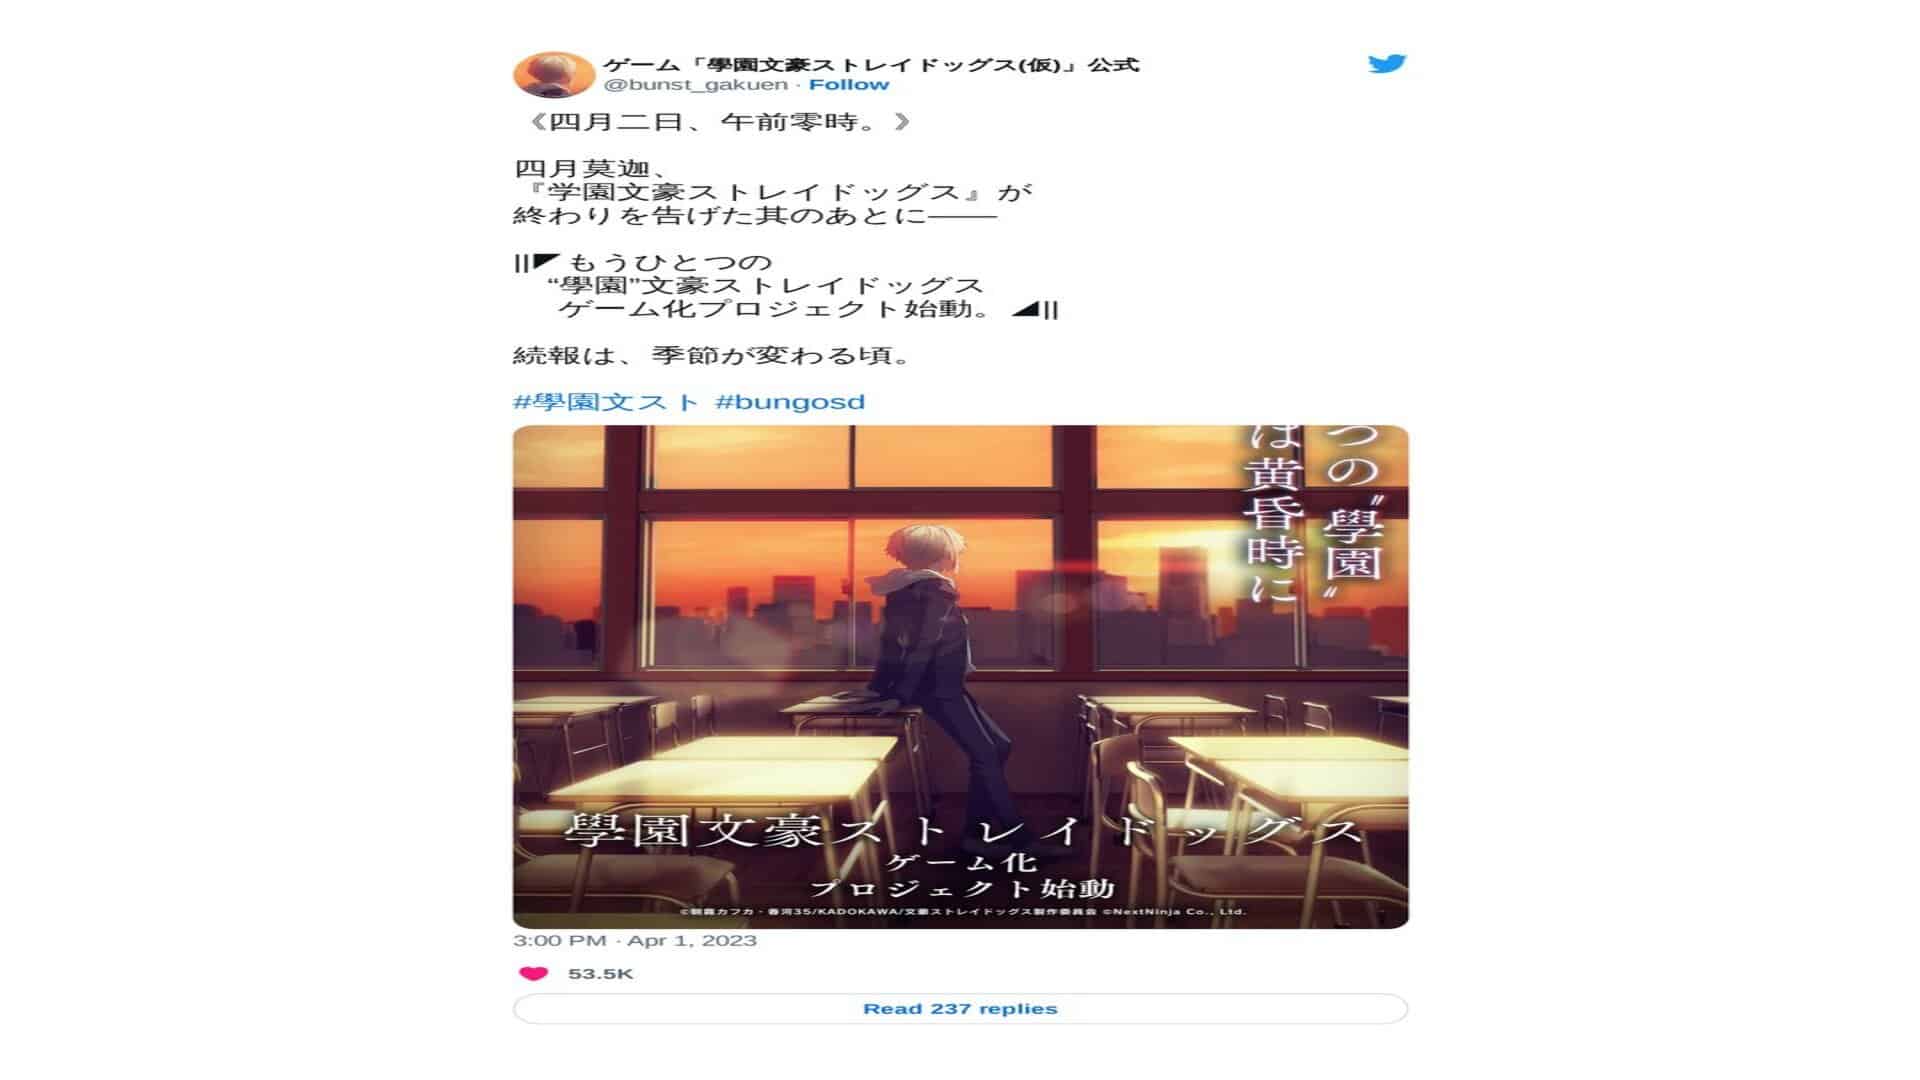 The tweet regarding the upcoming Bungo Stray Dogs game